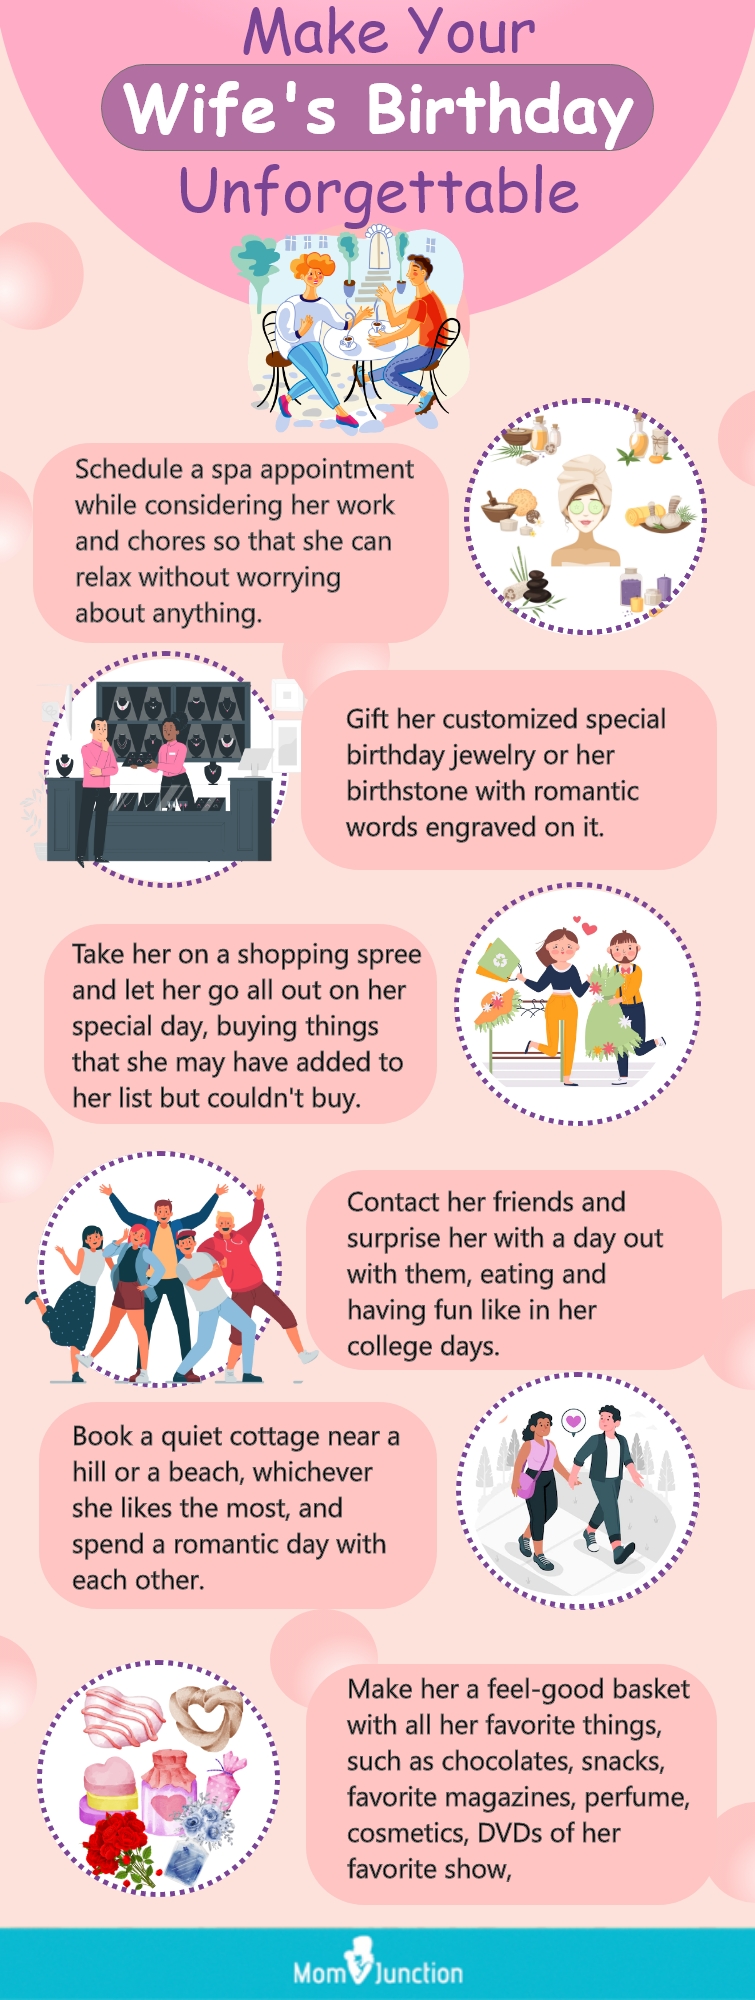 make your wife's birthday unforgettable [infographic]